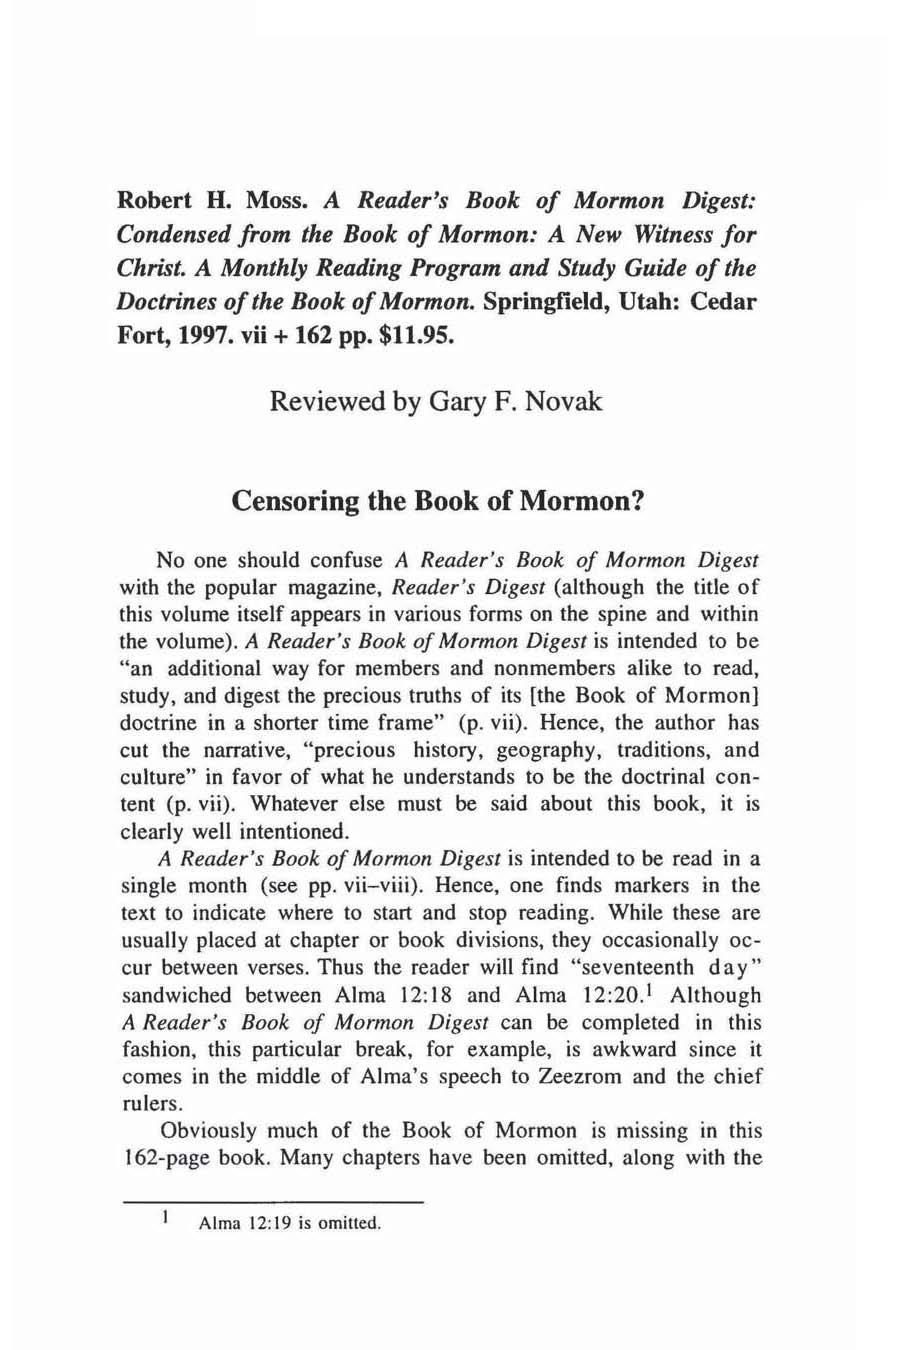 Robert H. Moss. A Reader's Book of Mormon Digest: Condensed from the Book of Mormon: A New Witness for Christ. A Monthly Reading Program and Study Guide of the Doctrines of the Book of Mormon.